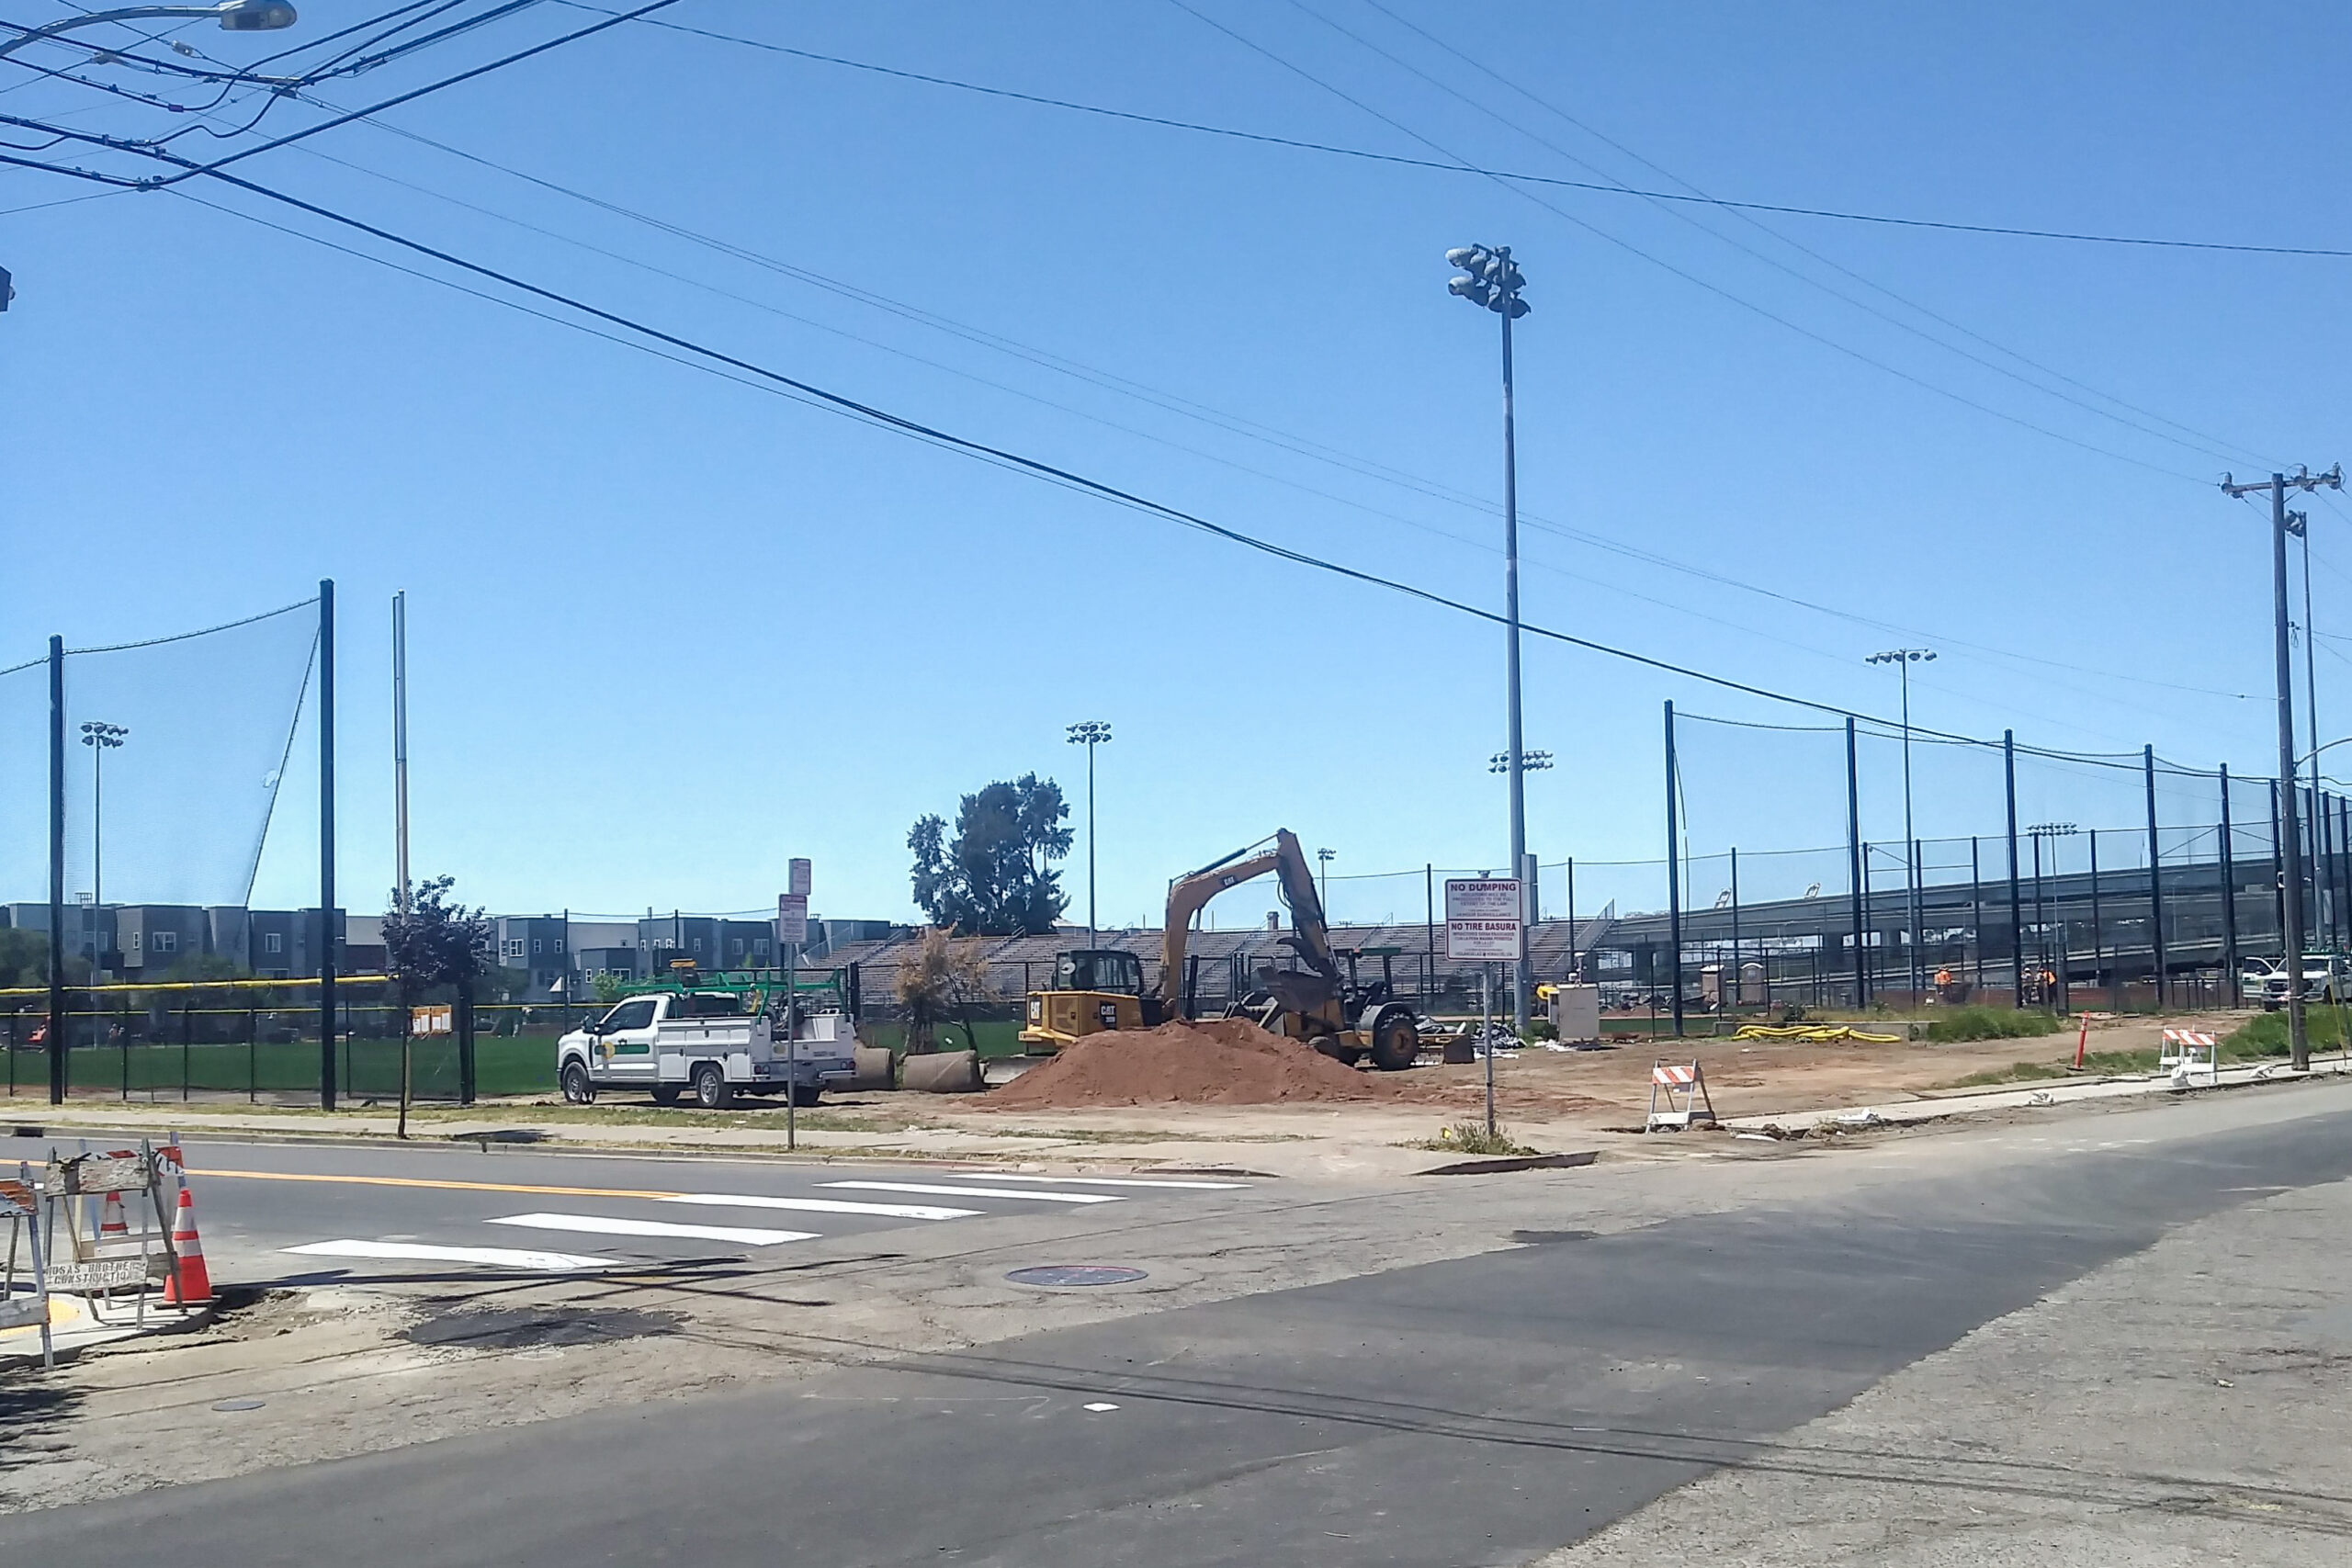 Oakland Ballers construction progress, image published on Twitter by A's Fan Radio